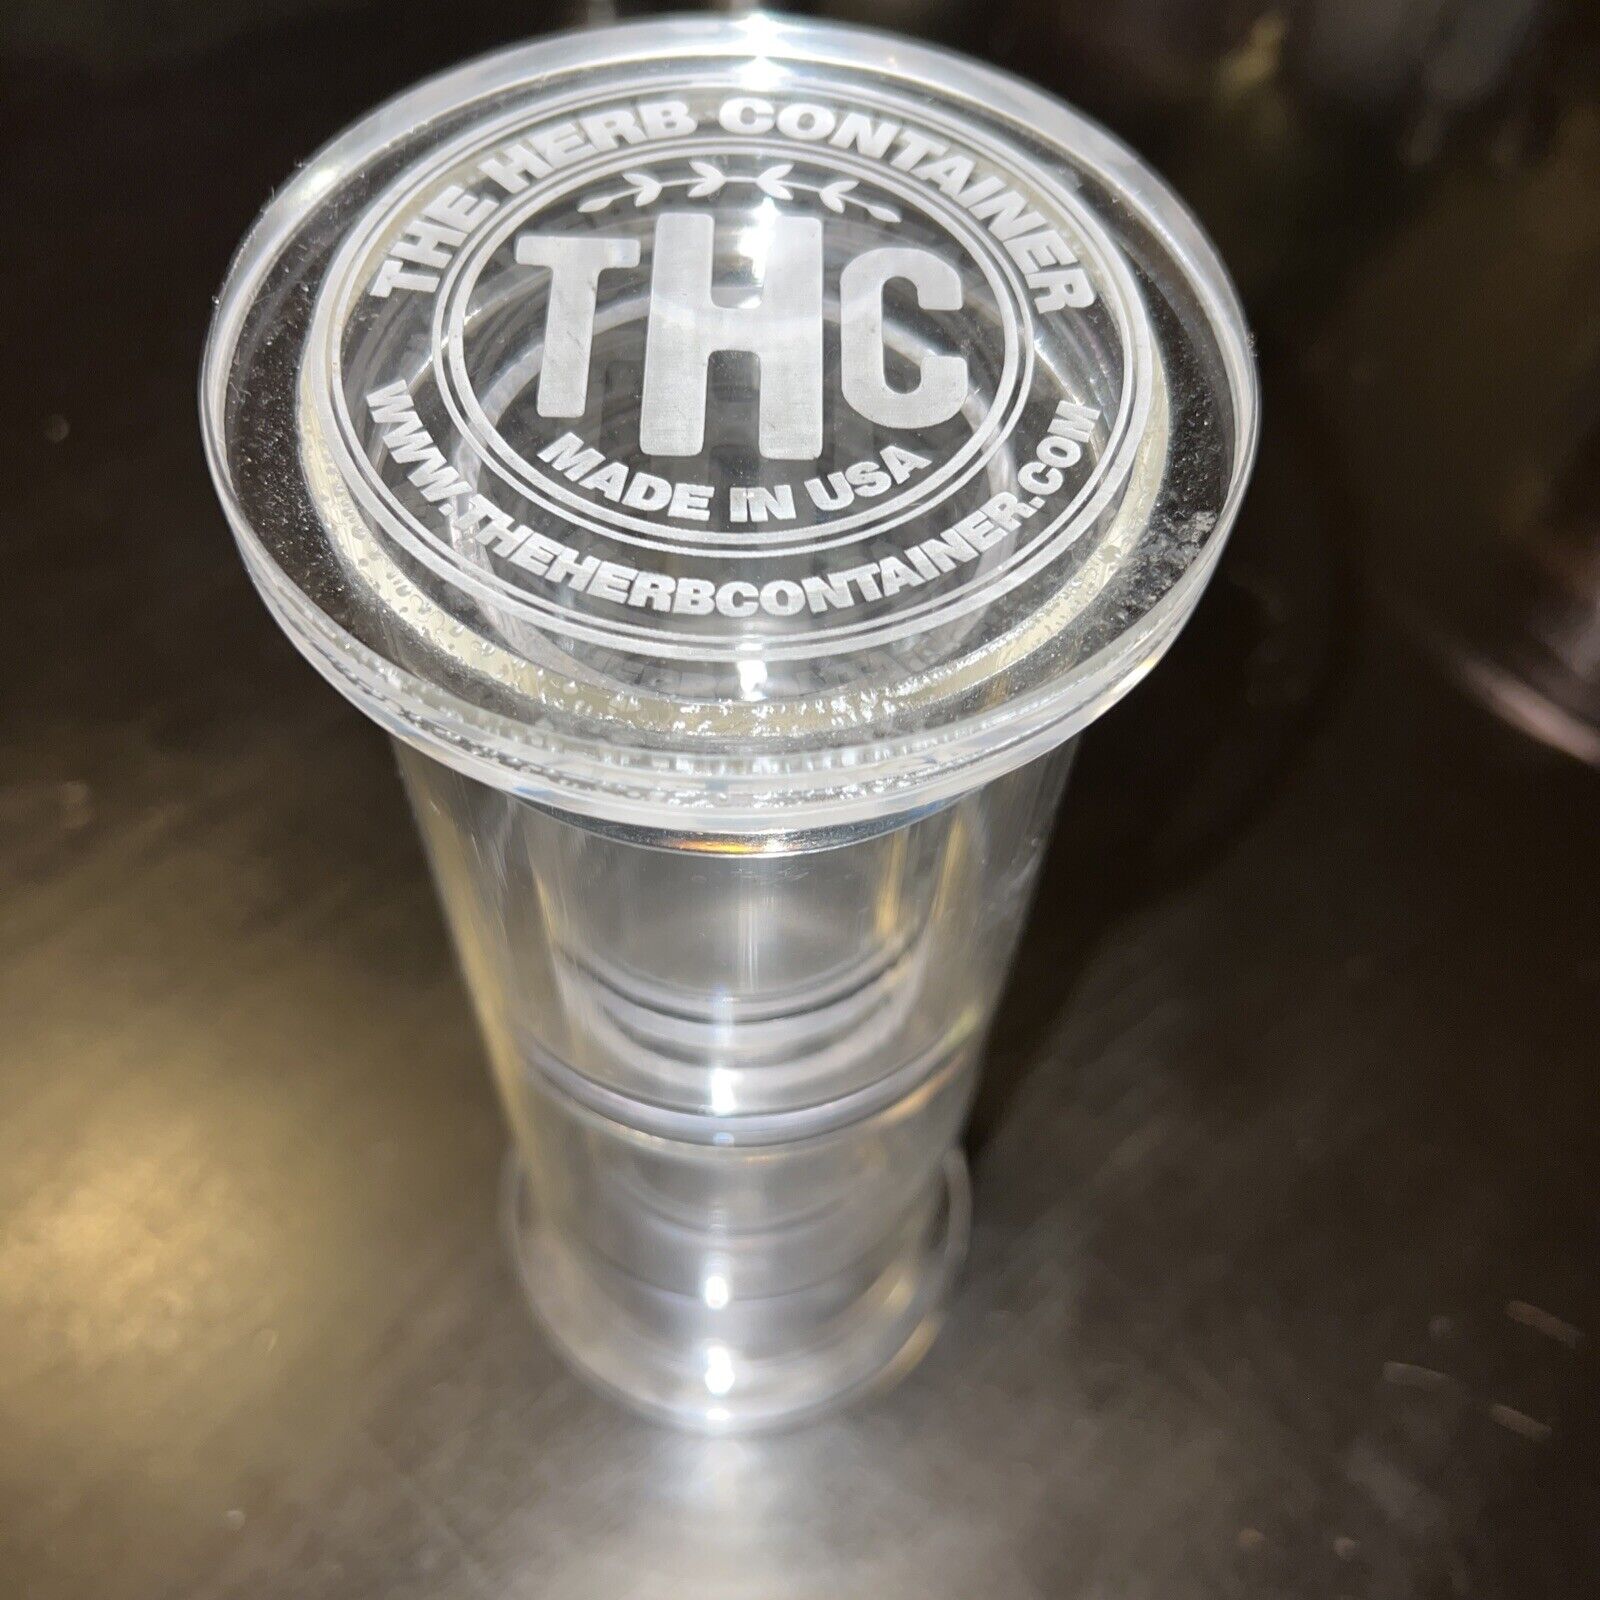 The herb container THC